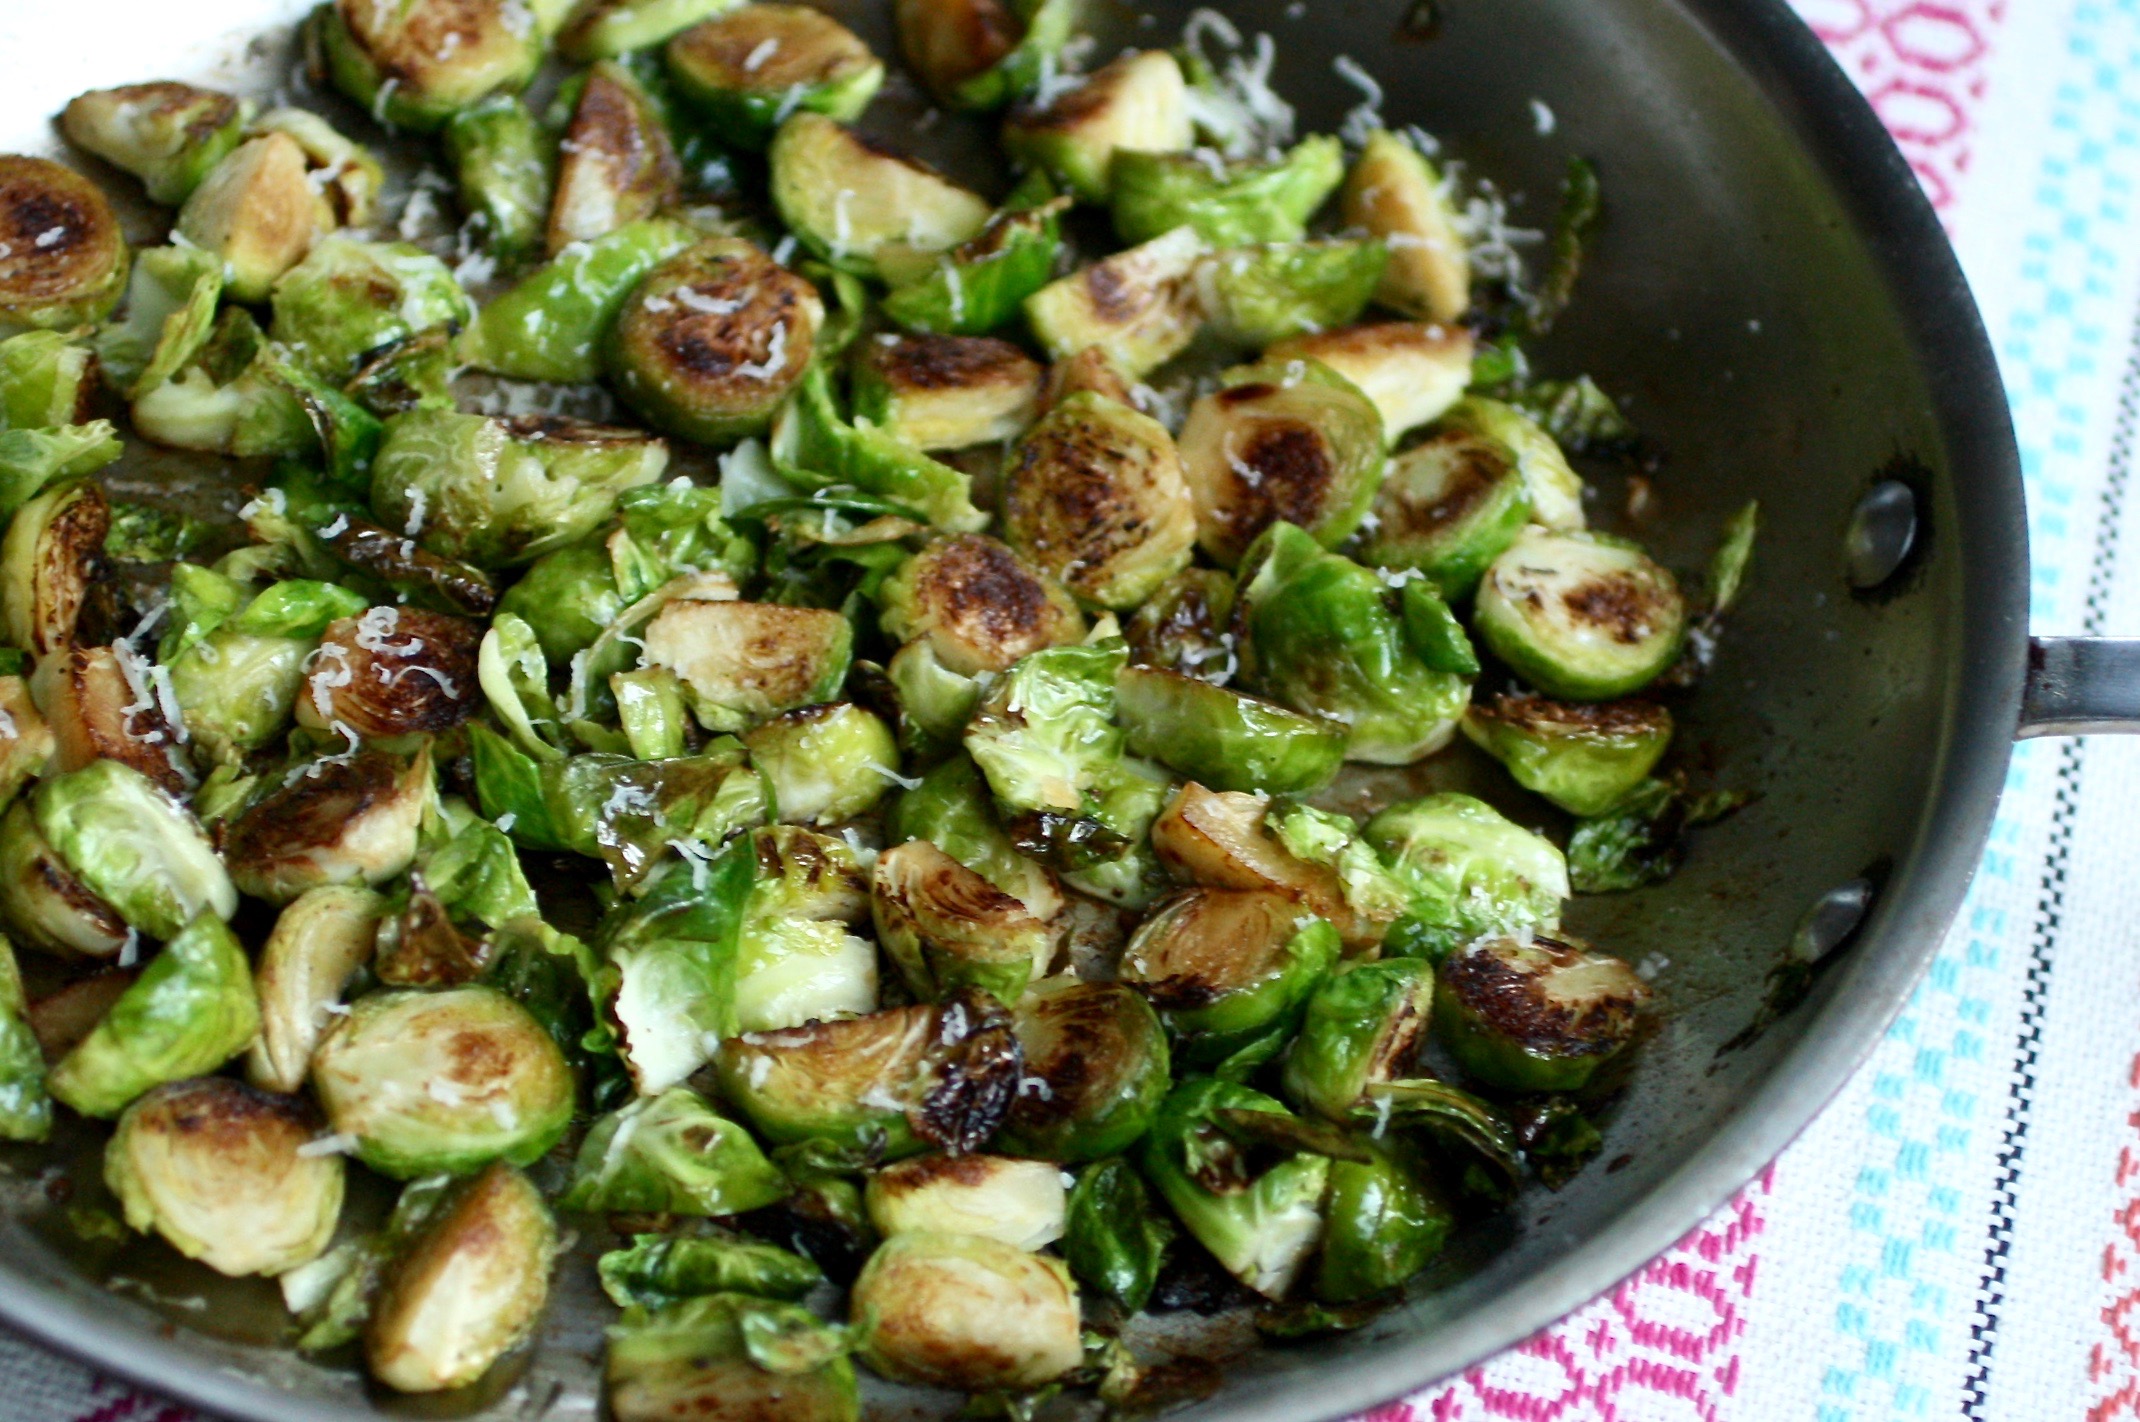 3 easy methods for how to cook the best brussels sprouts: sautéing. | ©Jane Sweeney Cool Mom Eats